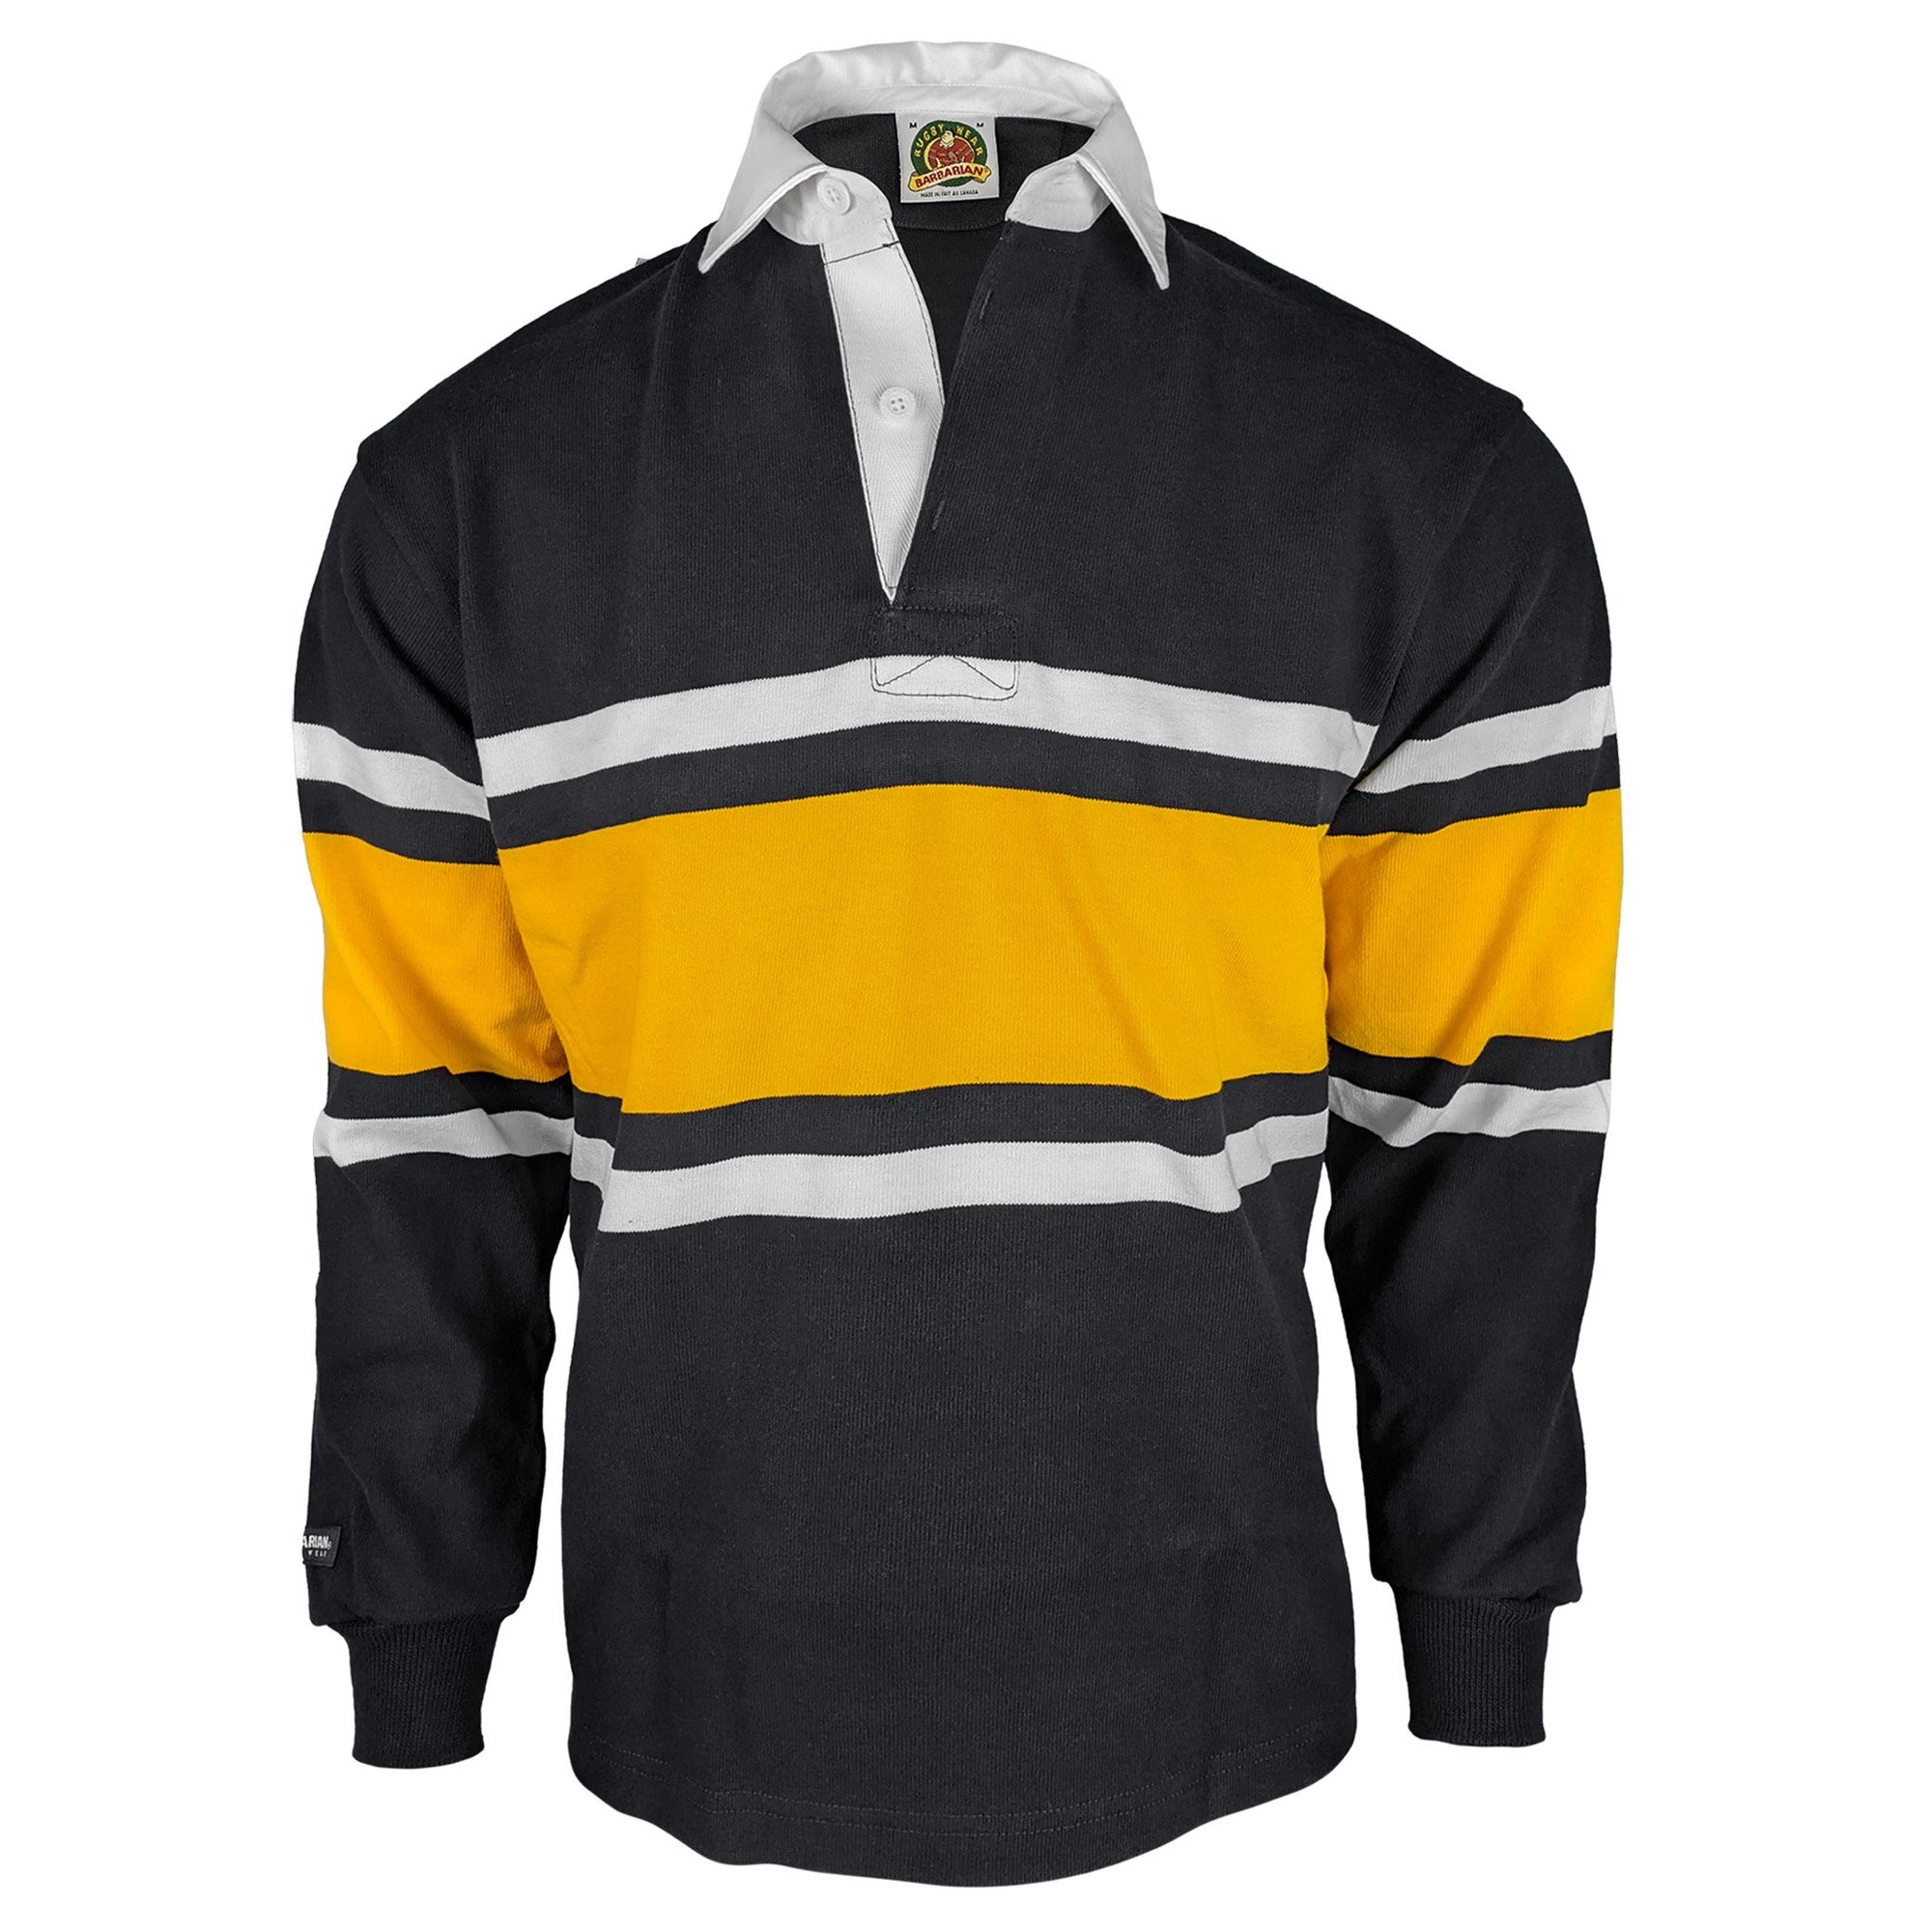 Barbarian Rugby Jerseys and Apparel - Rugby Imports